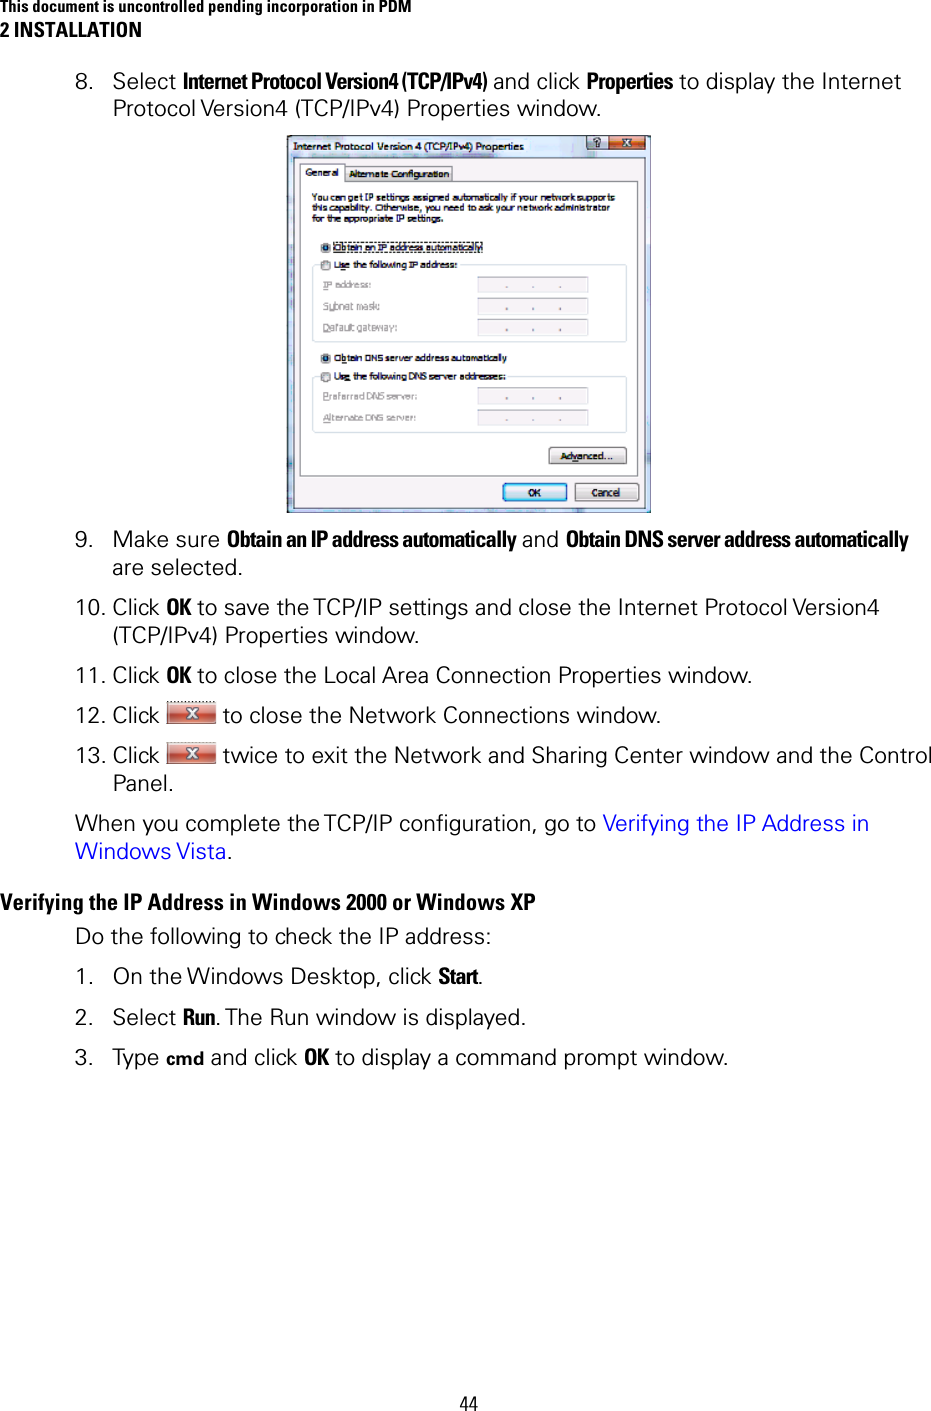 This document is uncontrolled pending incorporation in PDM 2 INSTALLATION 44 8. Select Internet Protocol Version4 (TCP/IPv4) and click Properties to display the Internet Protocol Version4 (TCP/IPv4) Properties window.  9. Make sure Obtain an IP address automatically and Obtain DNS server address automatically are selected. 10. Click OK to save the TCP/IP settings and close the Internet Protocol Version4 (TCP/IPv4) Properties window. 11. Click OK to close the Local Area Connection Properties window. 12. Click   to close the Network Connections window. 13. Click   twice to exit the Network and Sharing Center window and the Control Panel. When you complete the TCP/IP configuration, go to Verifying the IP Address in Windows Vista. Verifying the IP Address in Windows 2000 or Windows XP  Do the following to check the IP address:  1. On the Windows Desktop, click Start. 2. Select Run. The Run window is displayed.  3. Type cmd and click OK to display a command prompt window.   